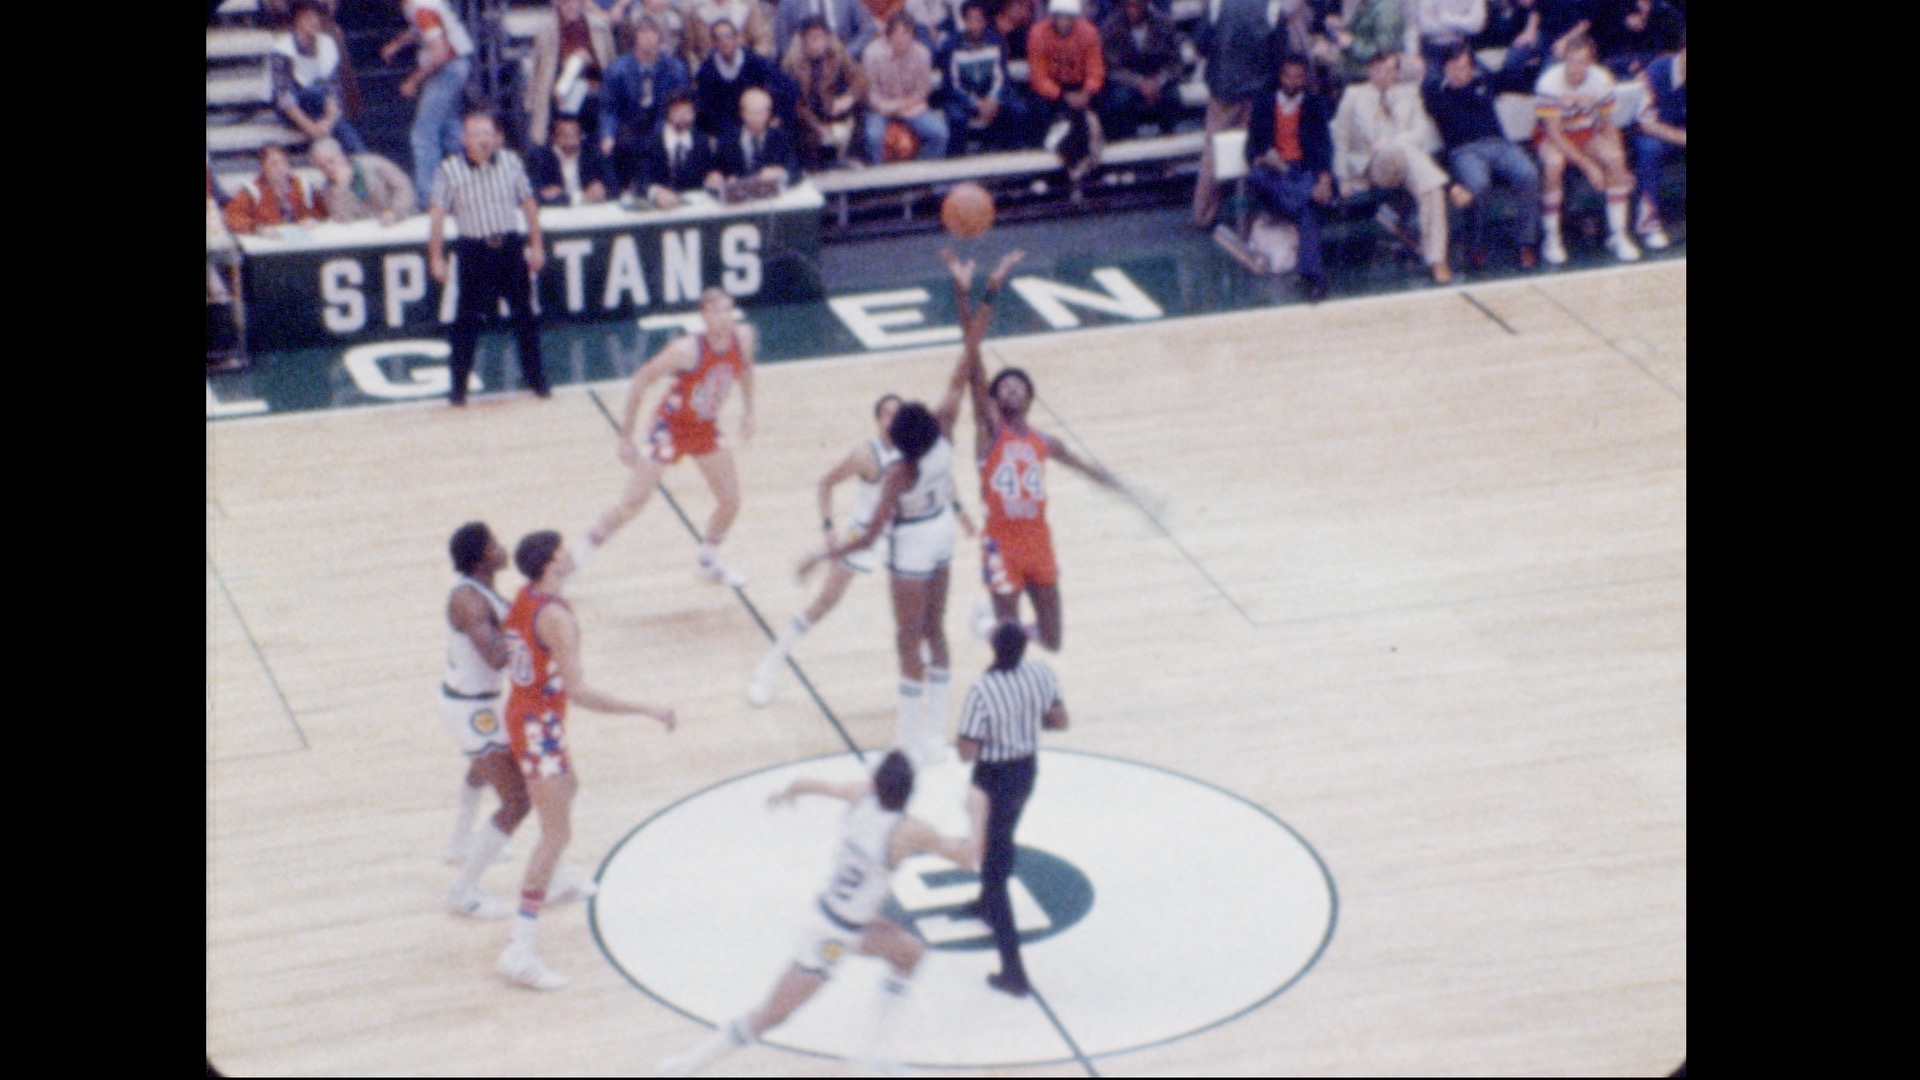 MSU Basketball vs. Athletes in Action, 1979